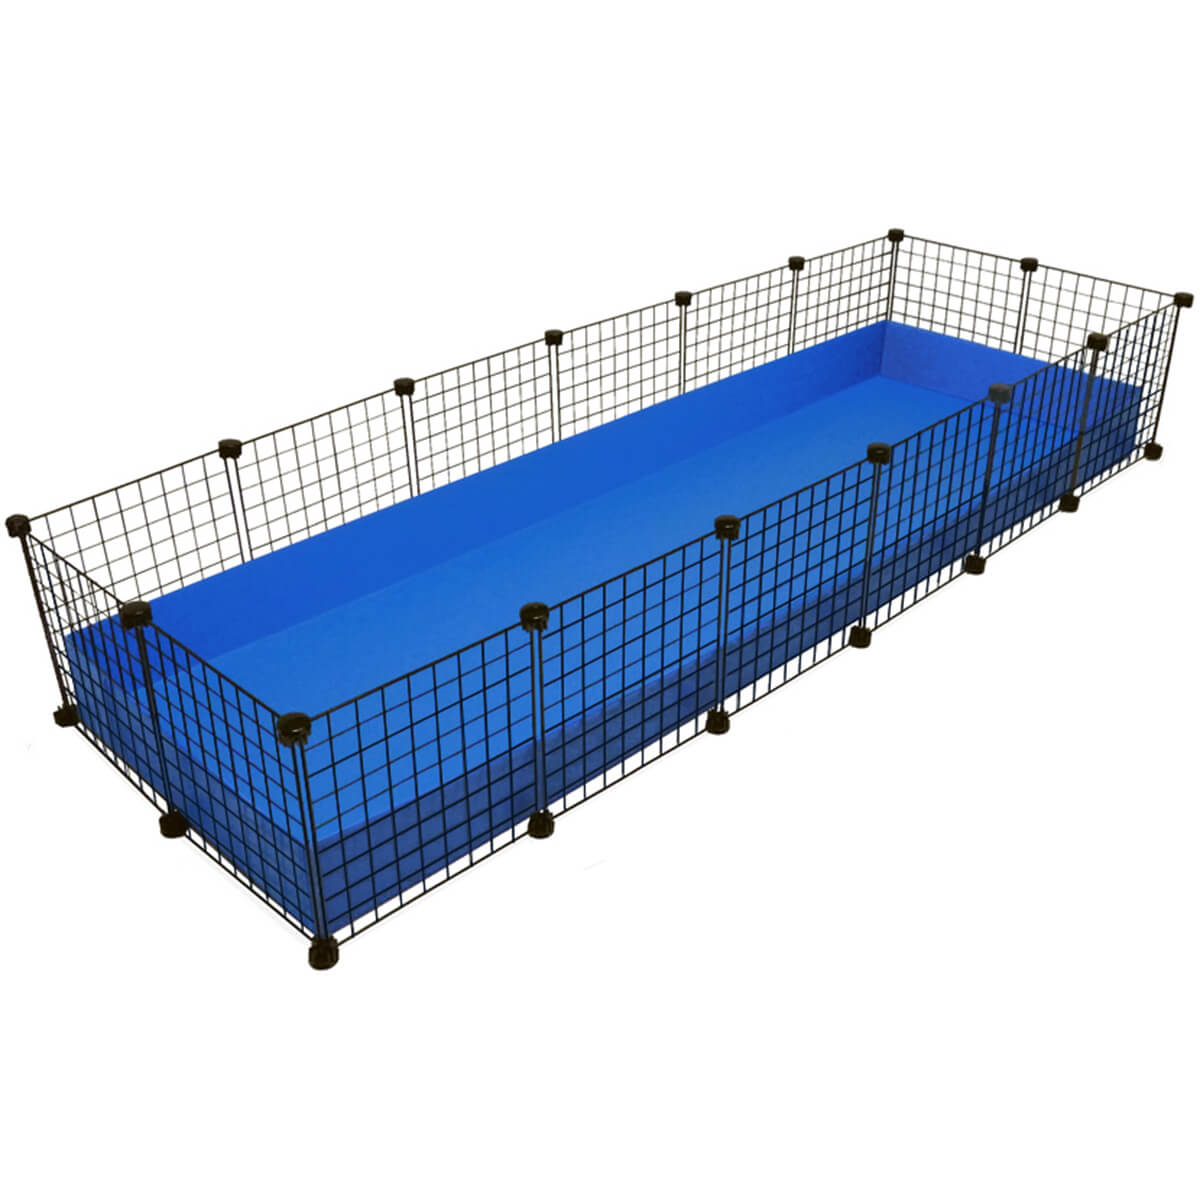 Jumbo (2x6 Grids) Cage - Standard Cages 